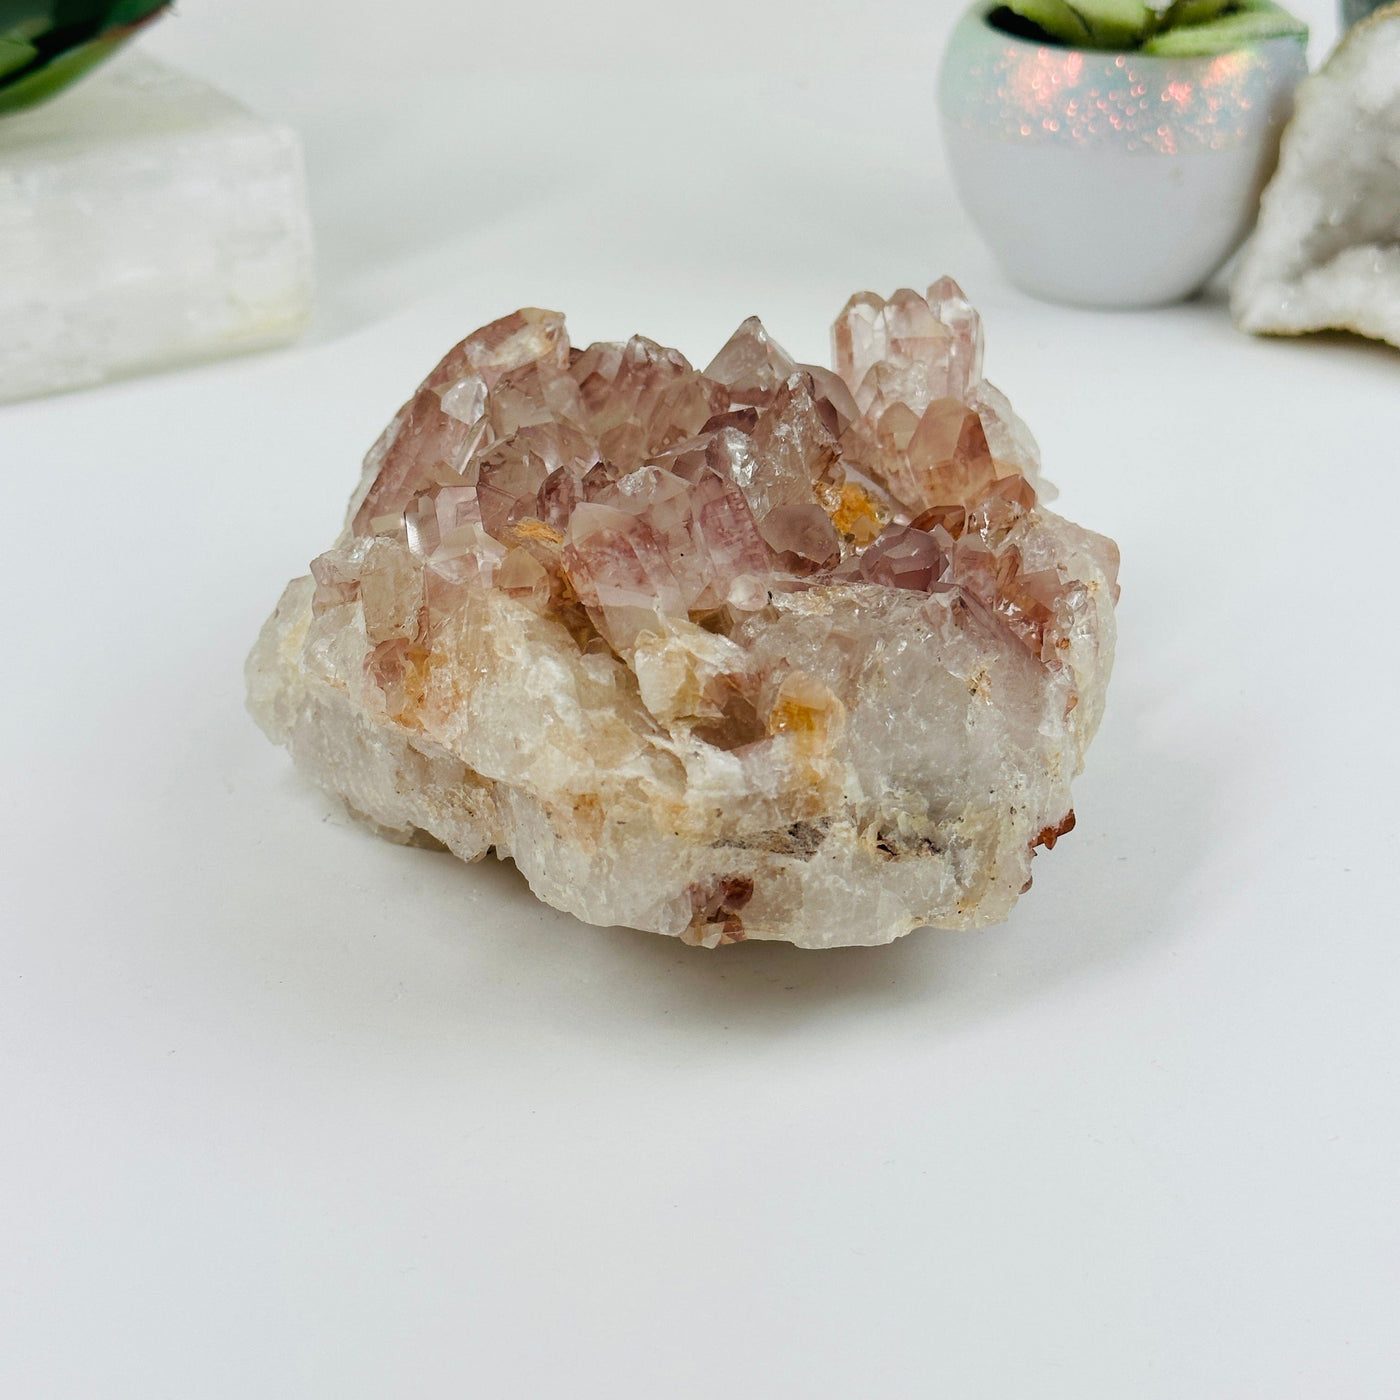 lithium quartz formation with decorations in the background